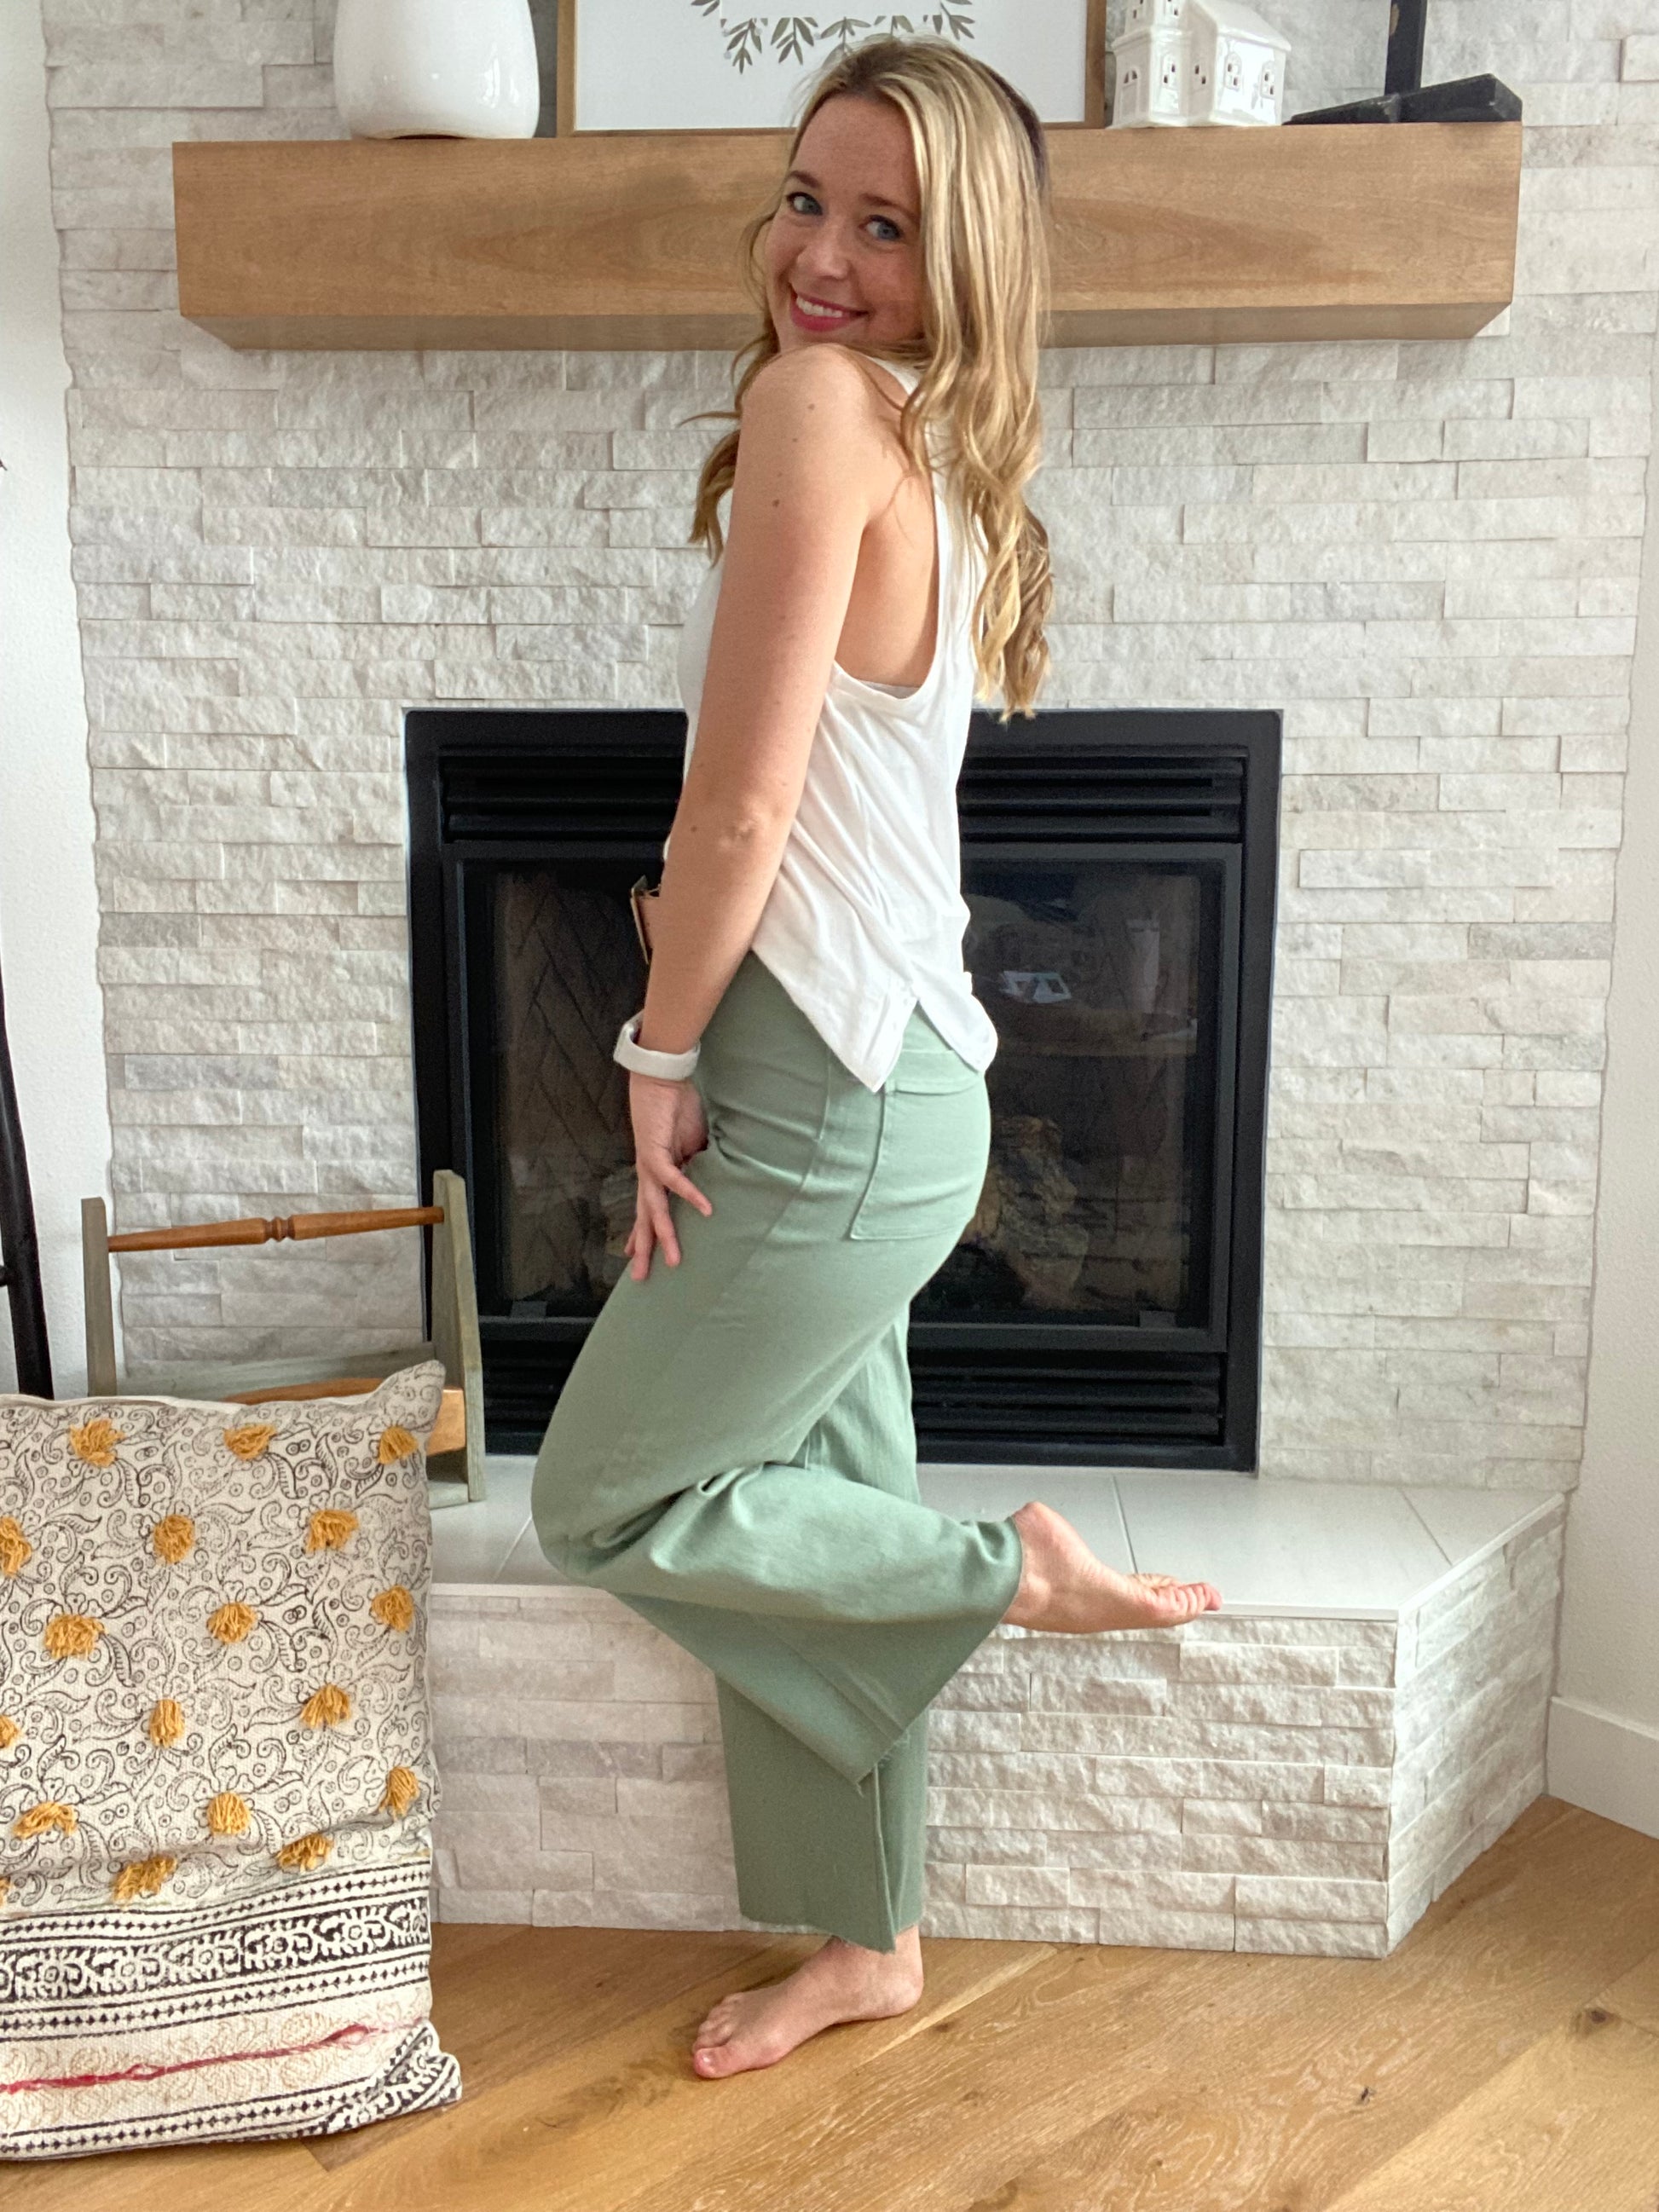 Our Cropped Stretch Jeans are crafted from 97% cotton and 3% spandex for a comfortable yet flattering fit. This wide leg, high waisted style features a clean cut hemline and is available in sizes Small (2-4), Medium (6-8), Large (8-10) and XL (10-12). These bottoms are perfect for work all summer long paired with a fun blouse and strappy sandals! 